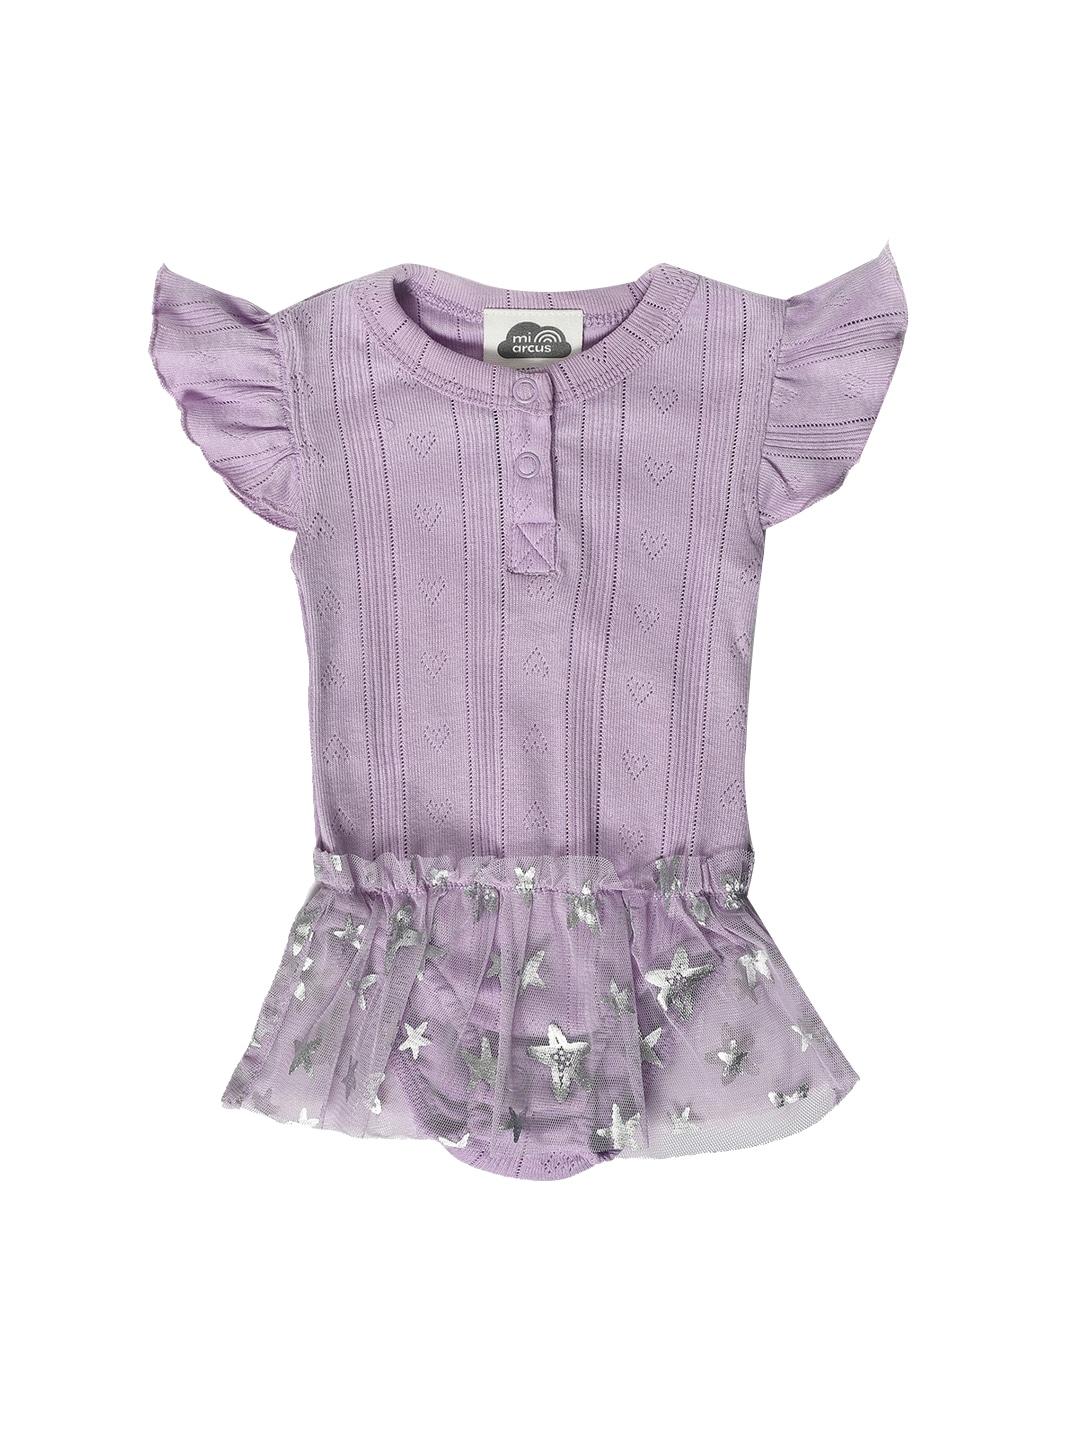 MiArcus Infants Girls Pure Cotton Rompers